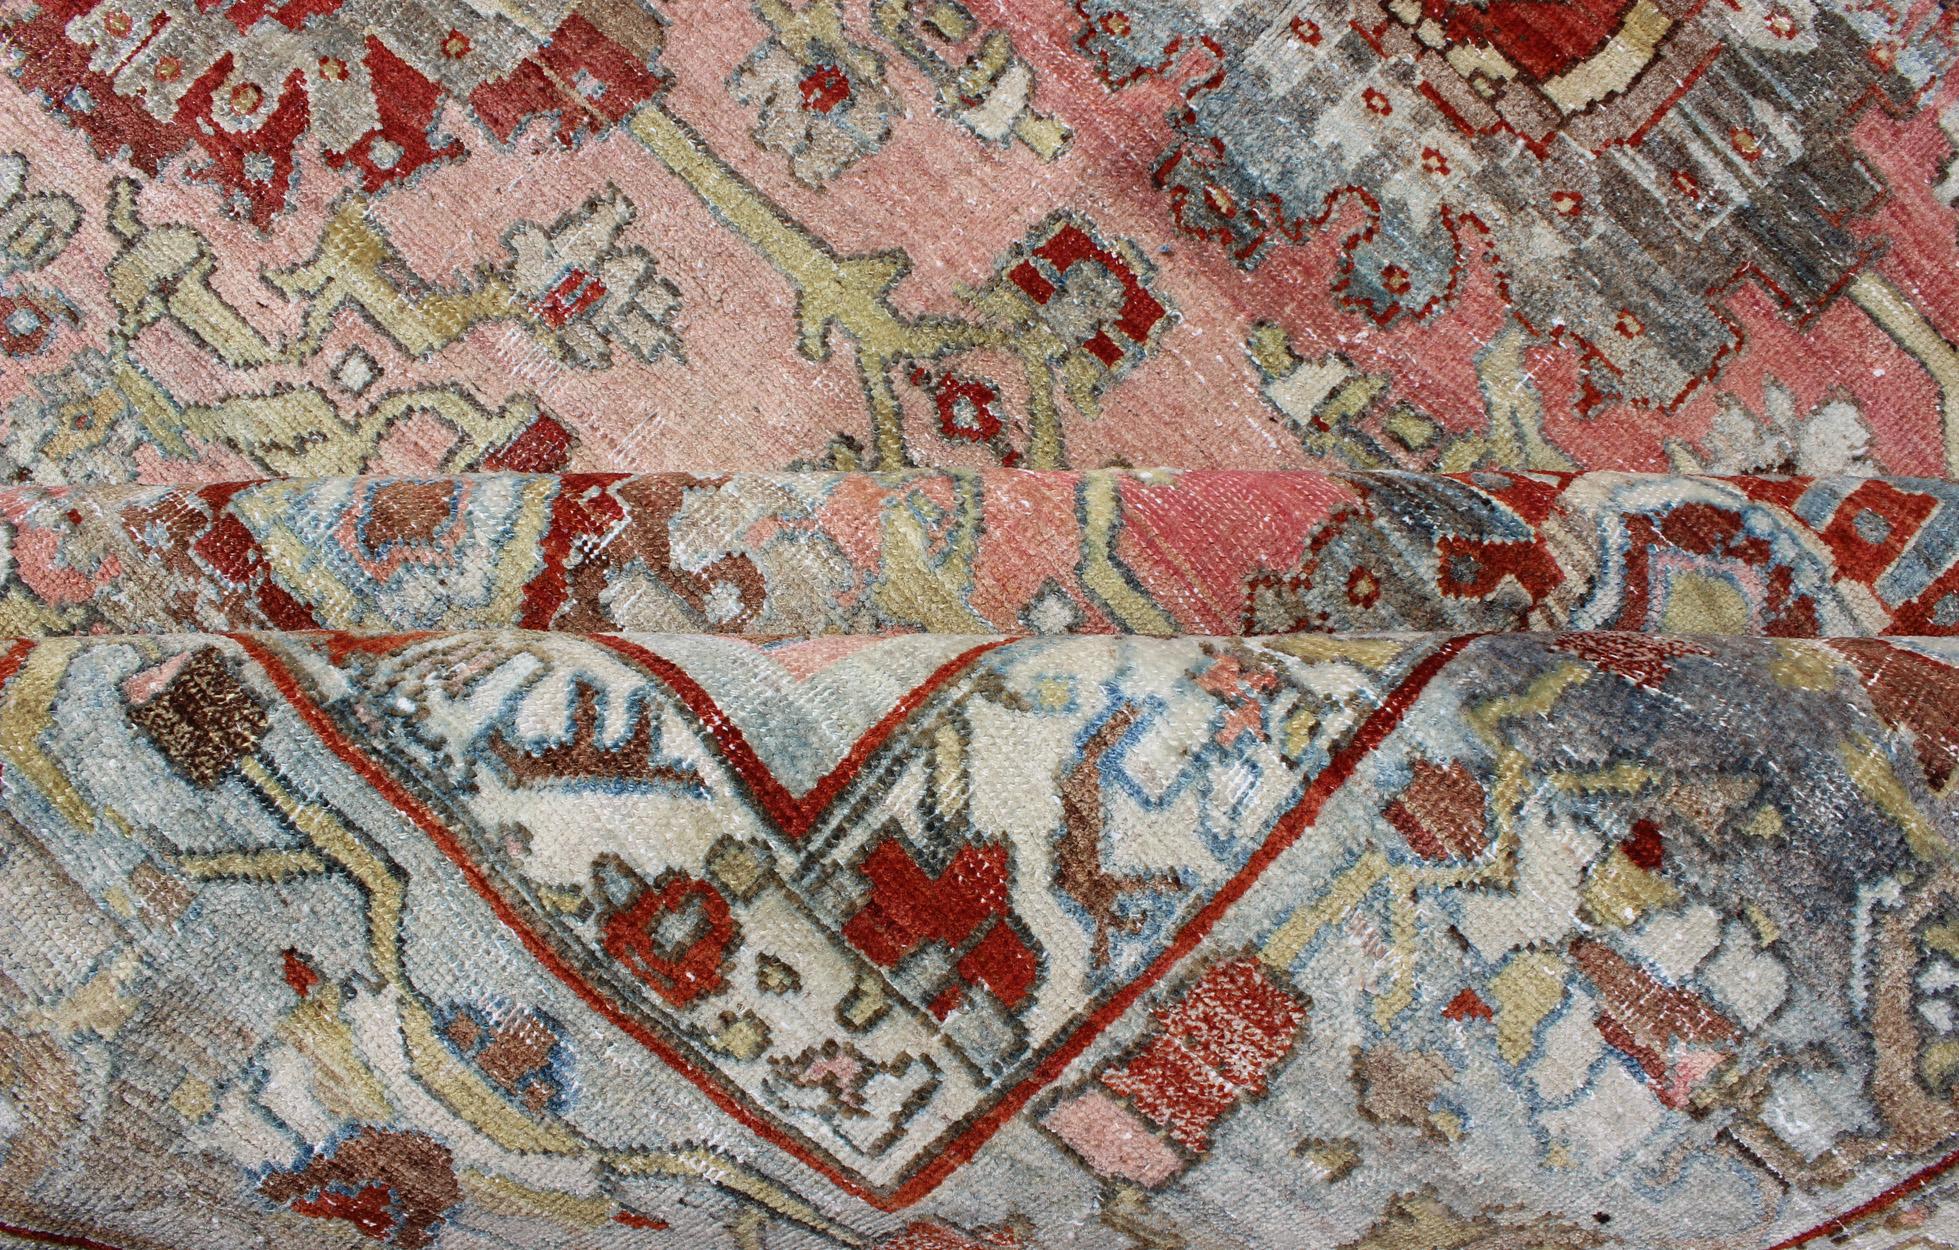 Antique Persian Bidjar Rug with All-Over Design in Light Pink & Light Gray In Good Condition For Sale In Atlanta, GA